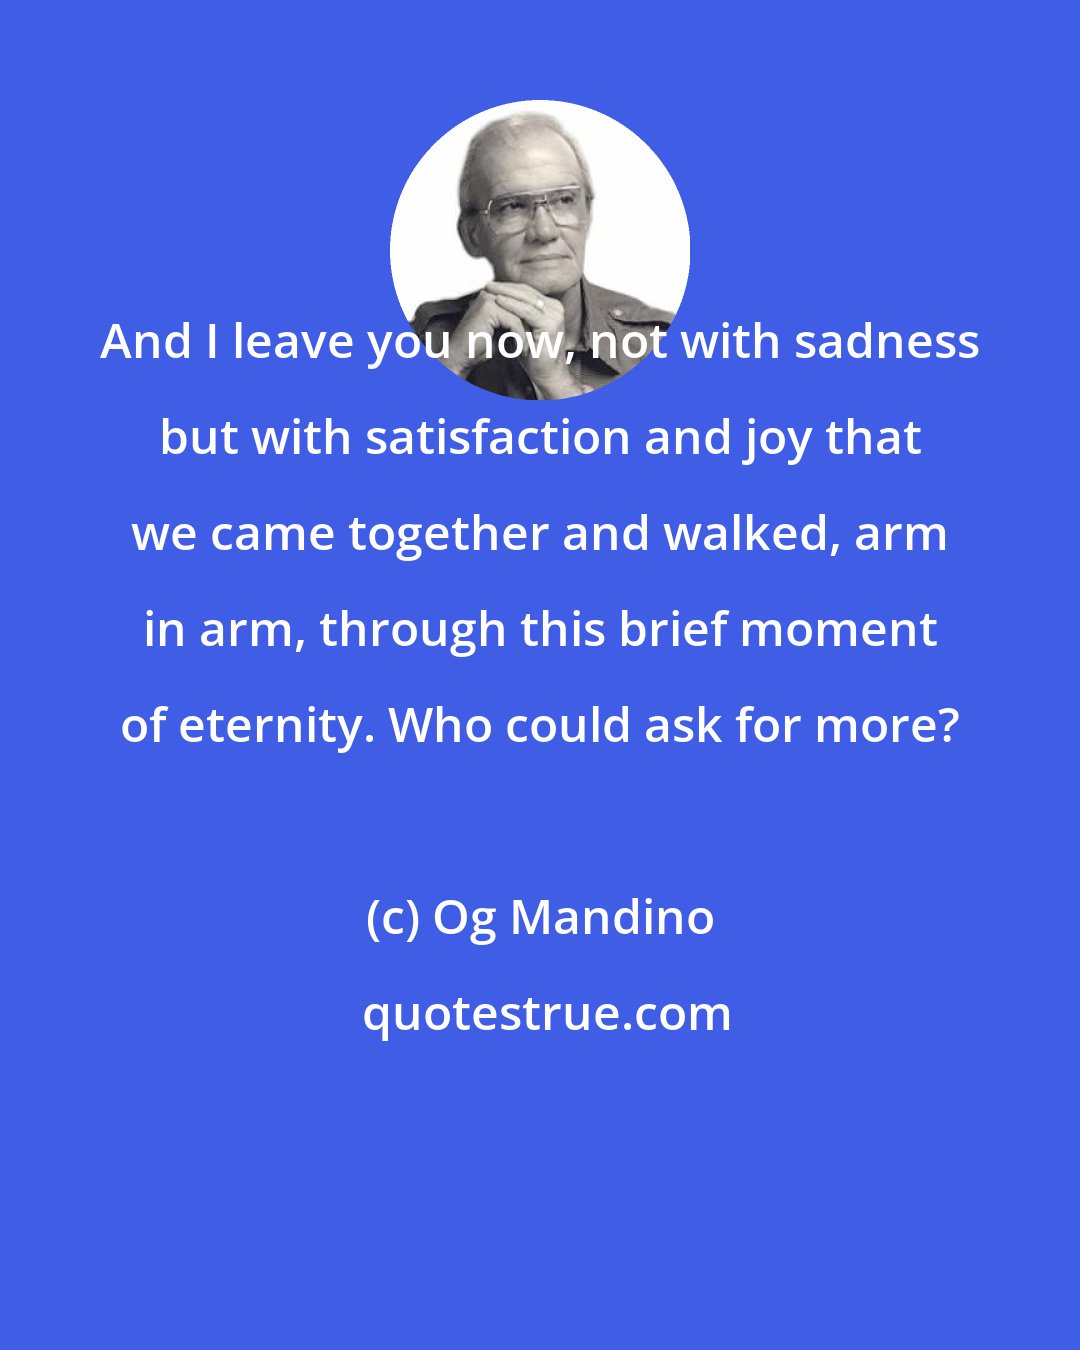 Og Mandino: And I leave you now, not with sadness but with satisfaction and joy that we came together and walked, arm in arm, through this brief moment of eternity. Who could ask for more?